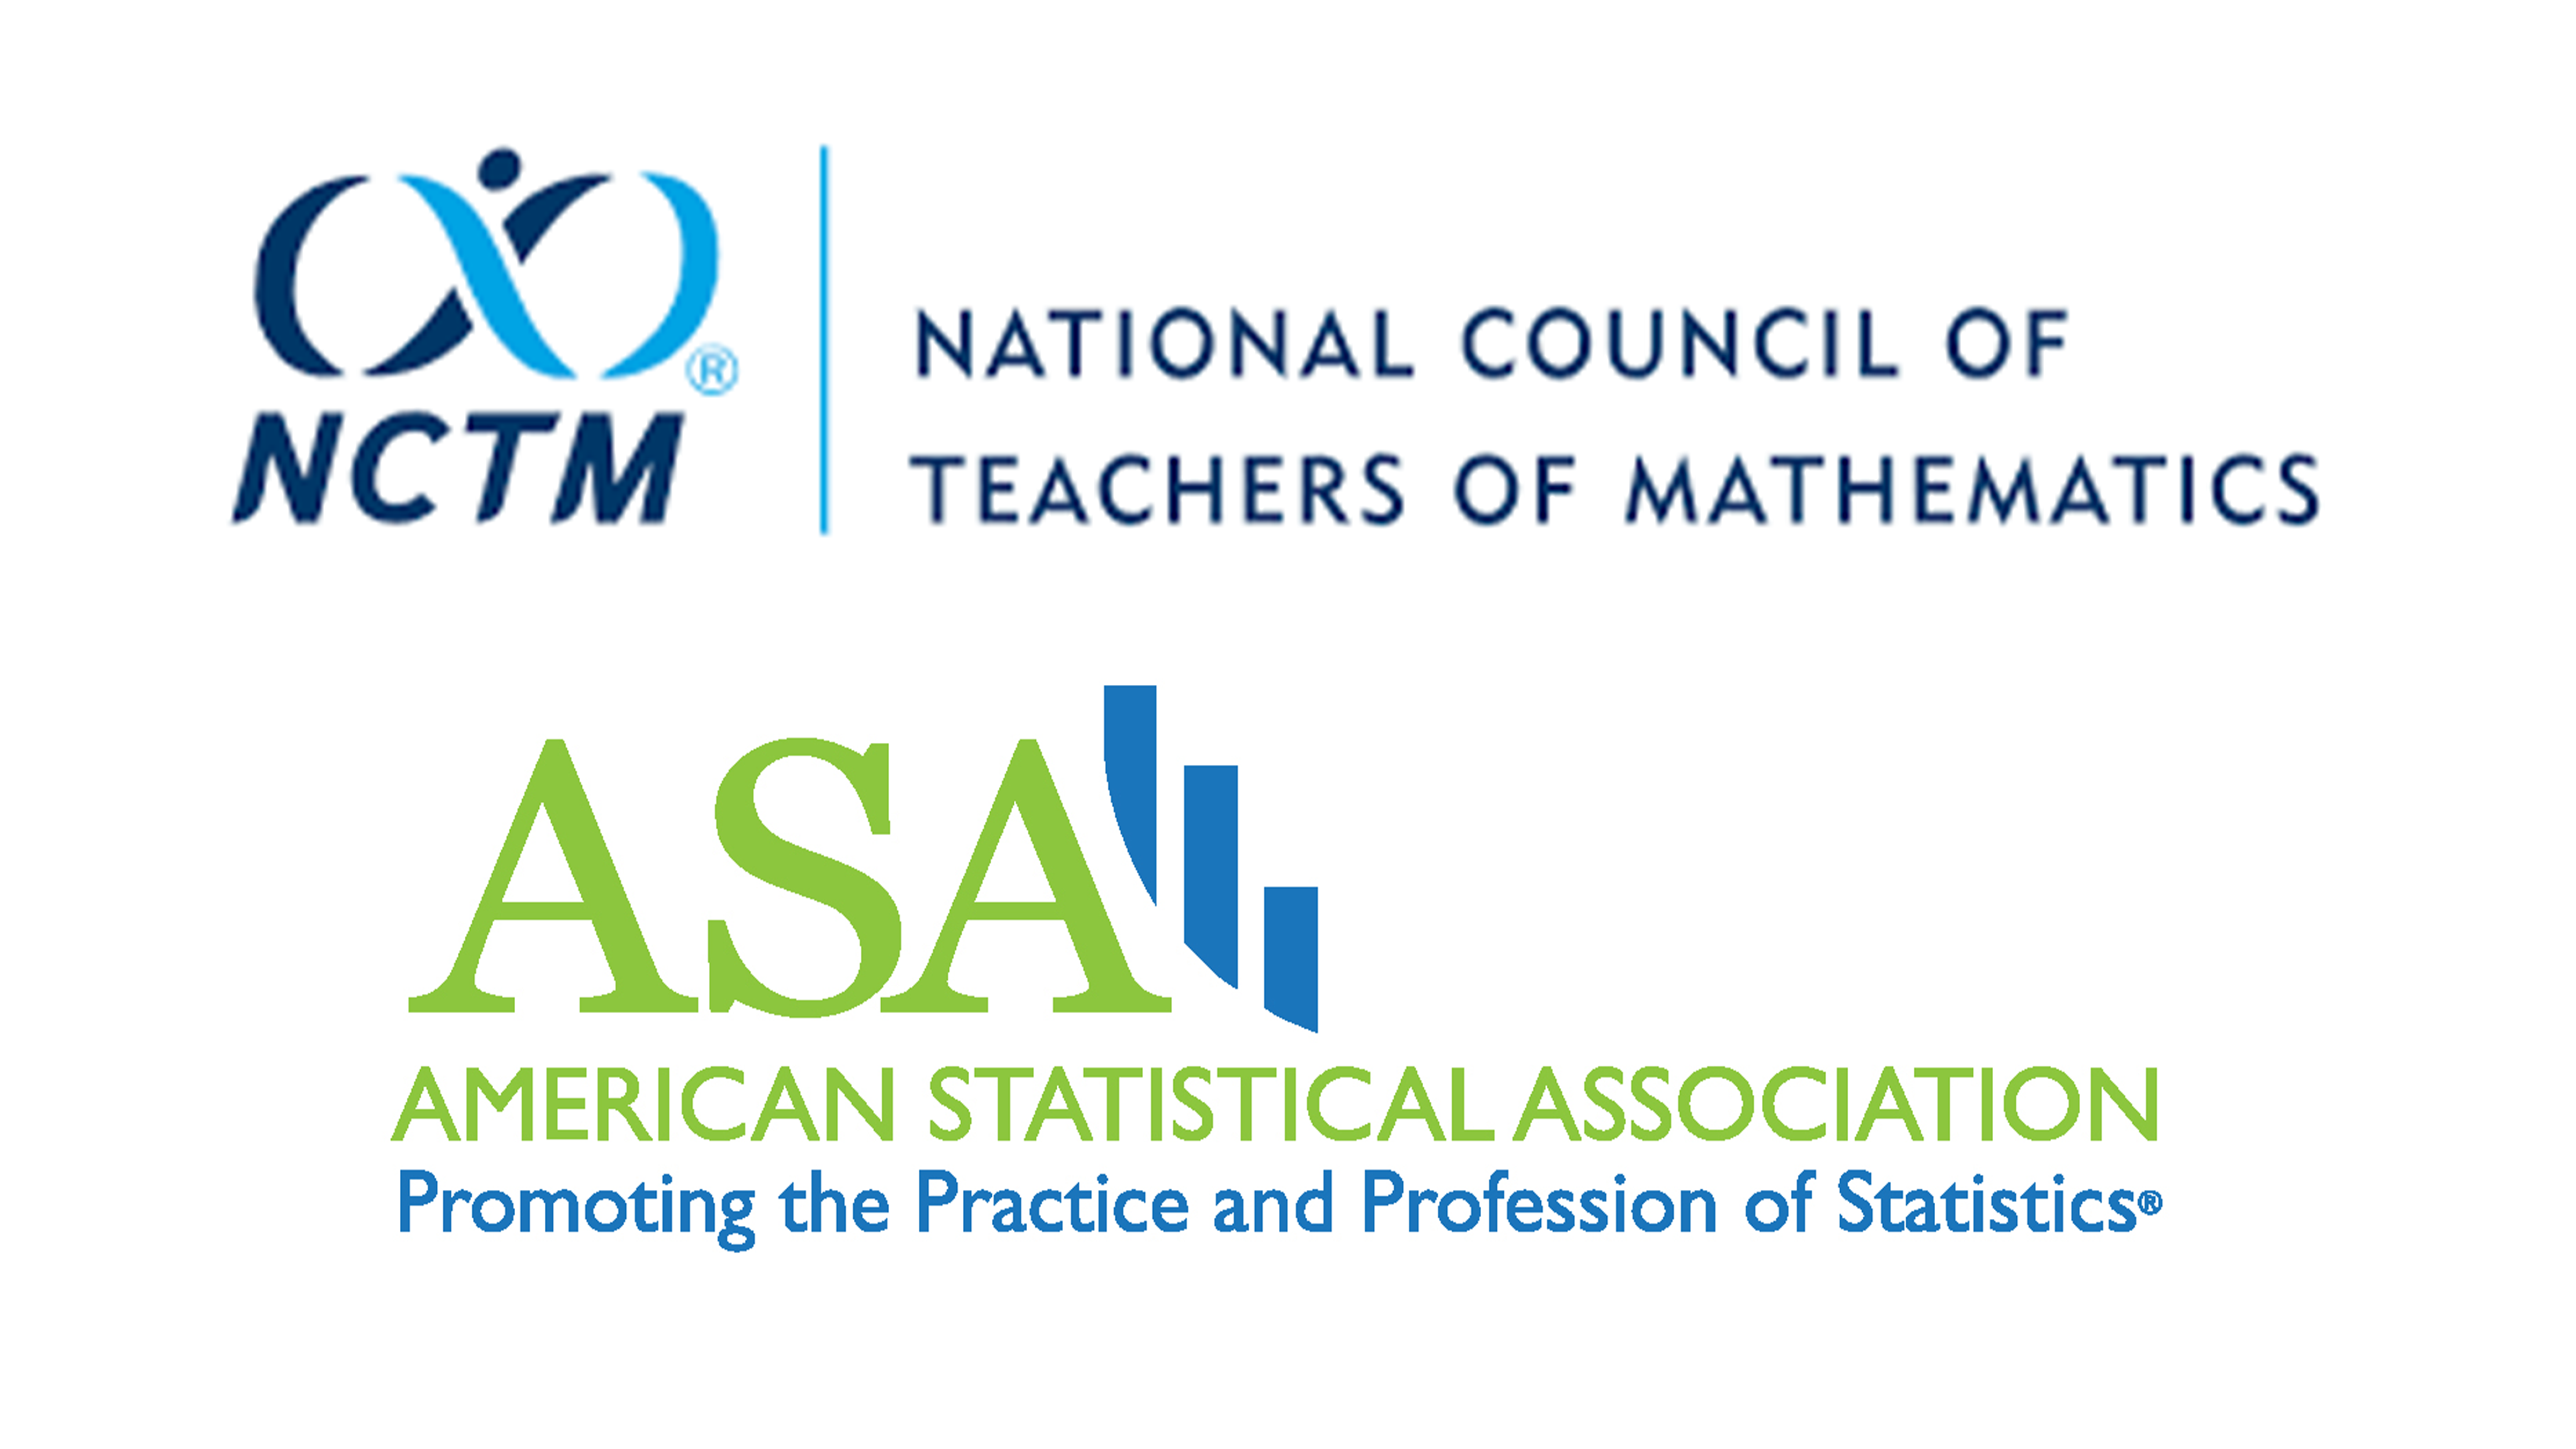 National Council of Teachers of Mathematics and American Statistical Association